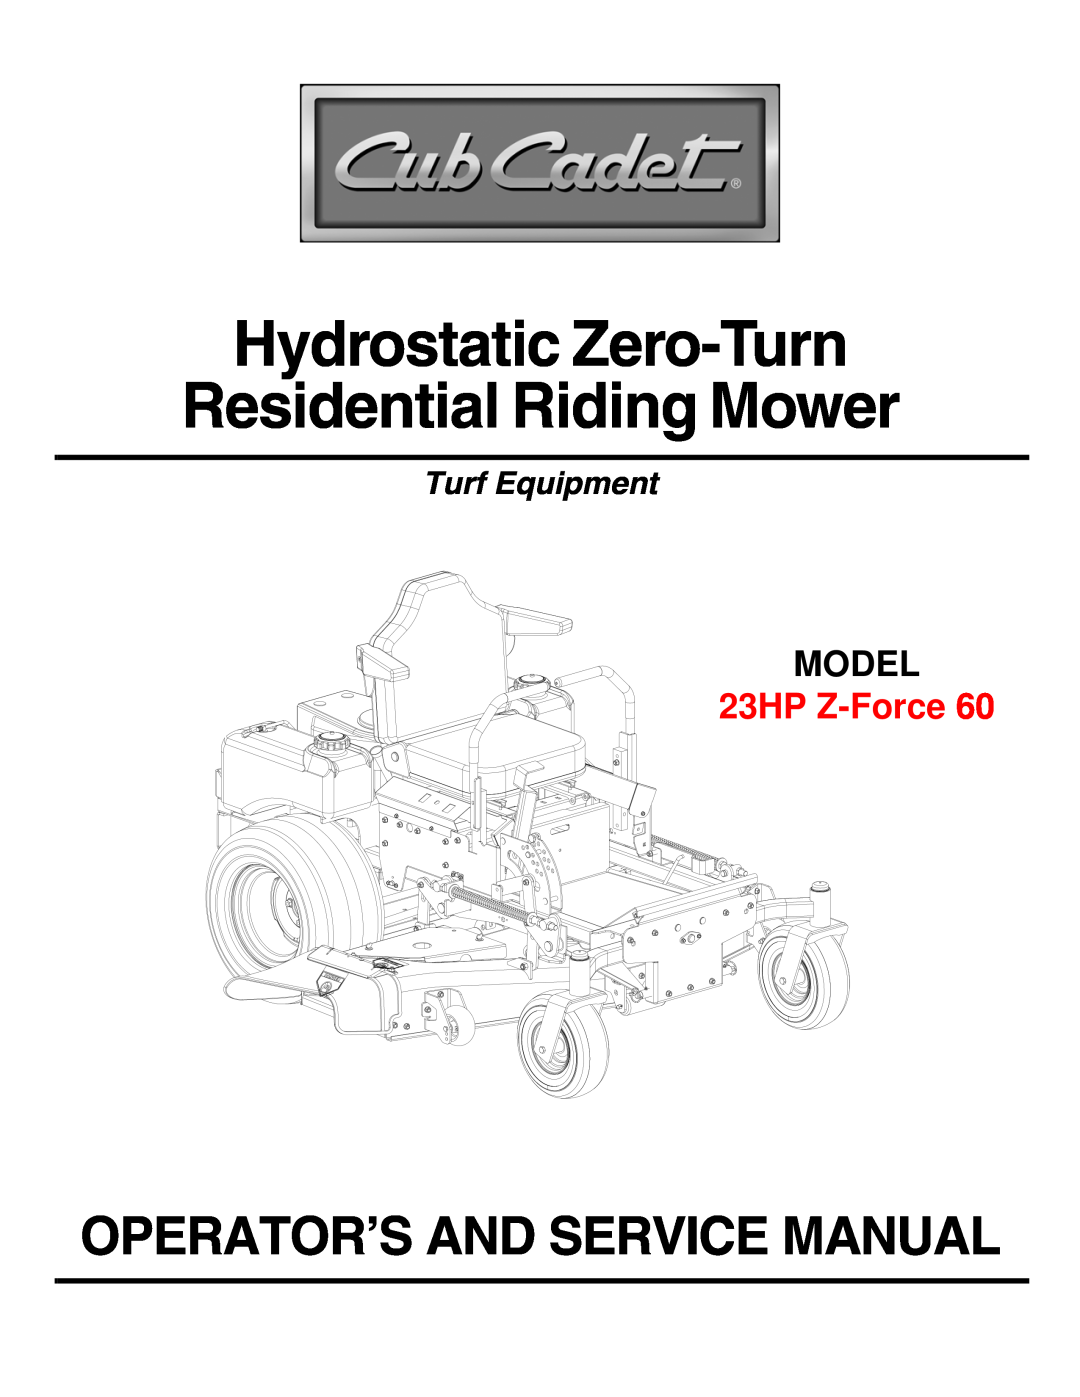 Cub Cadet 23HP Z-Force 60 service manual Hydrostatic Zero-Turn Residential Riding Mower, Operator’S And Service Manual 